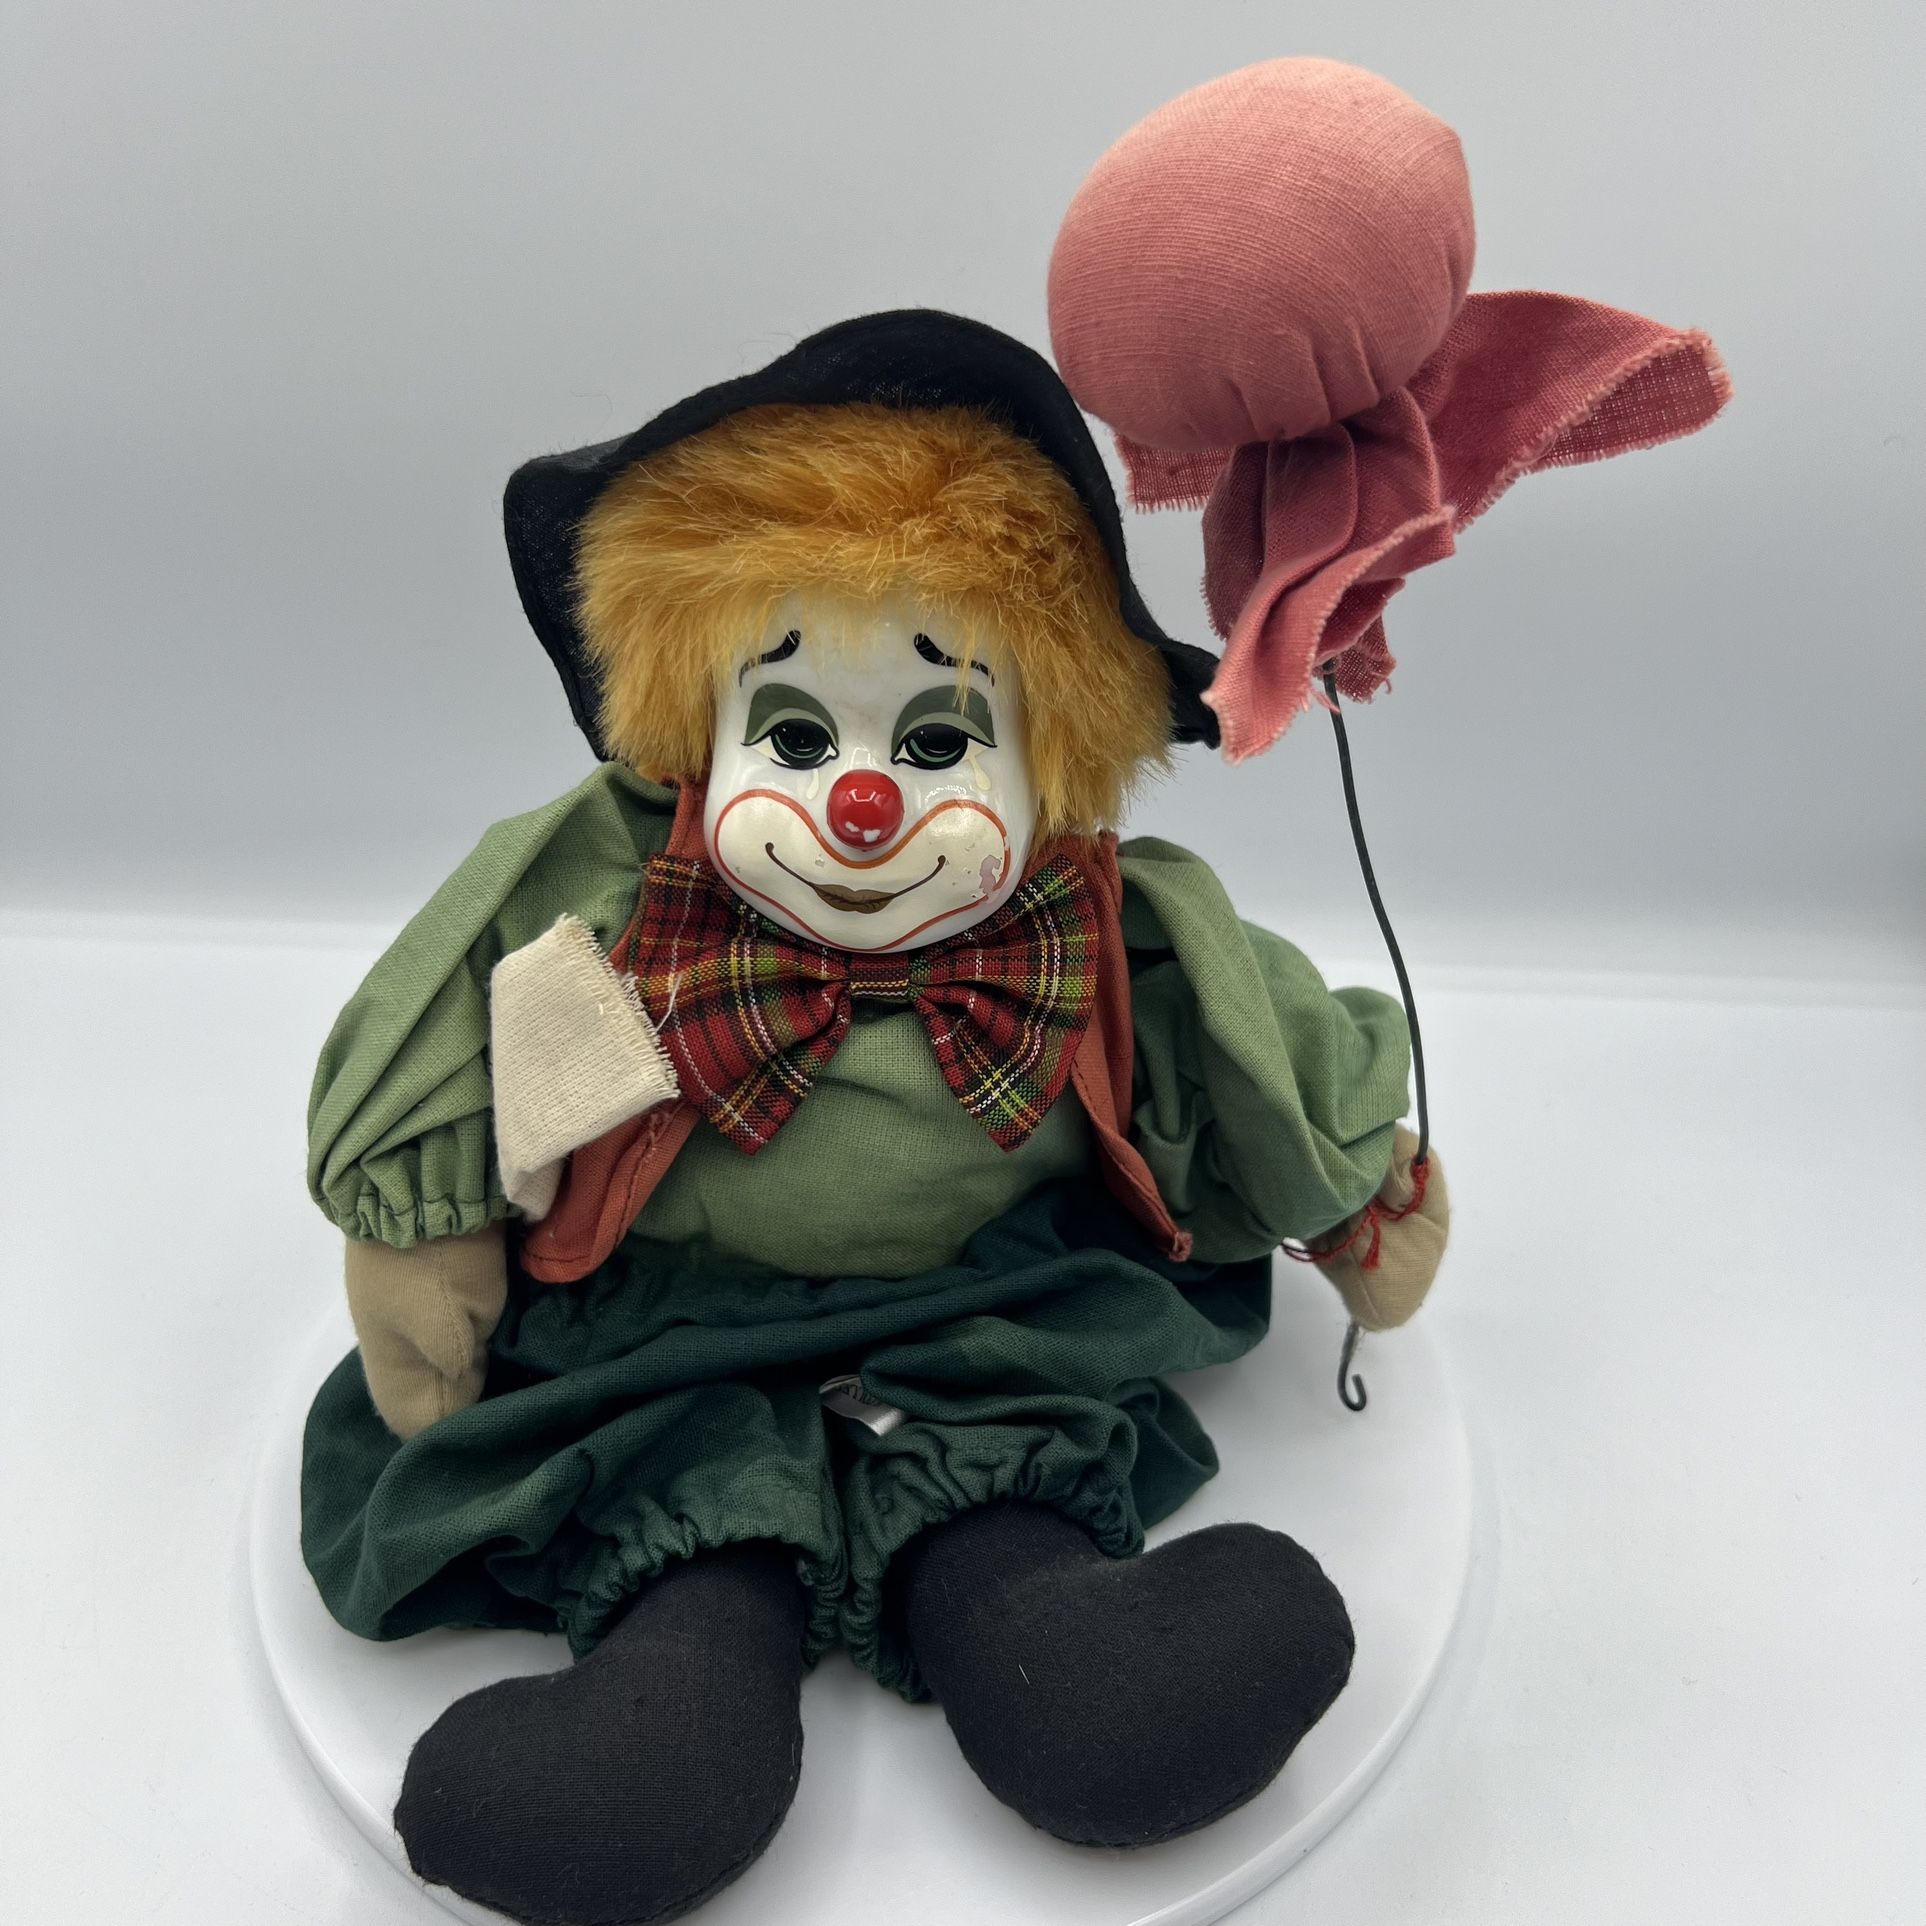 Vintage Rag & Porcelain Hobo Clown Doll with Red Balloon- 12 inches tall